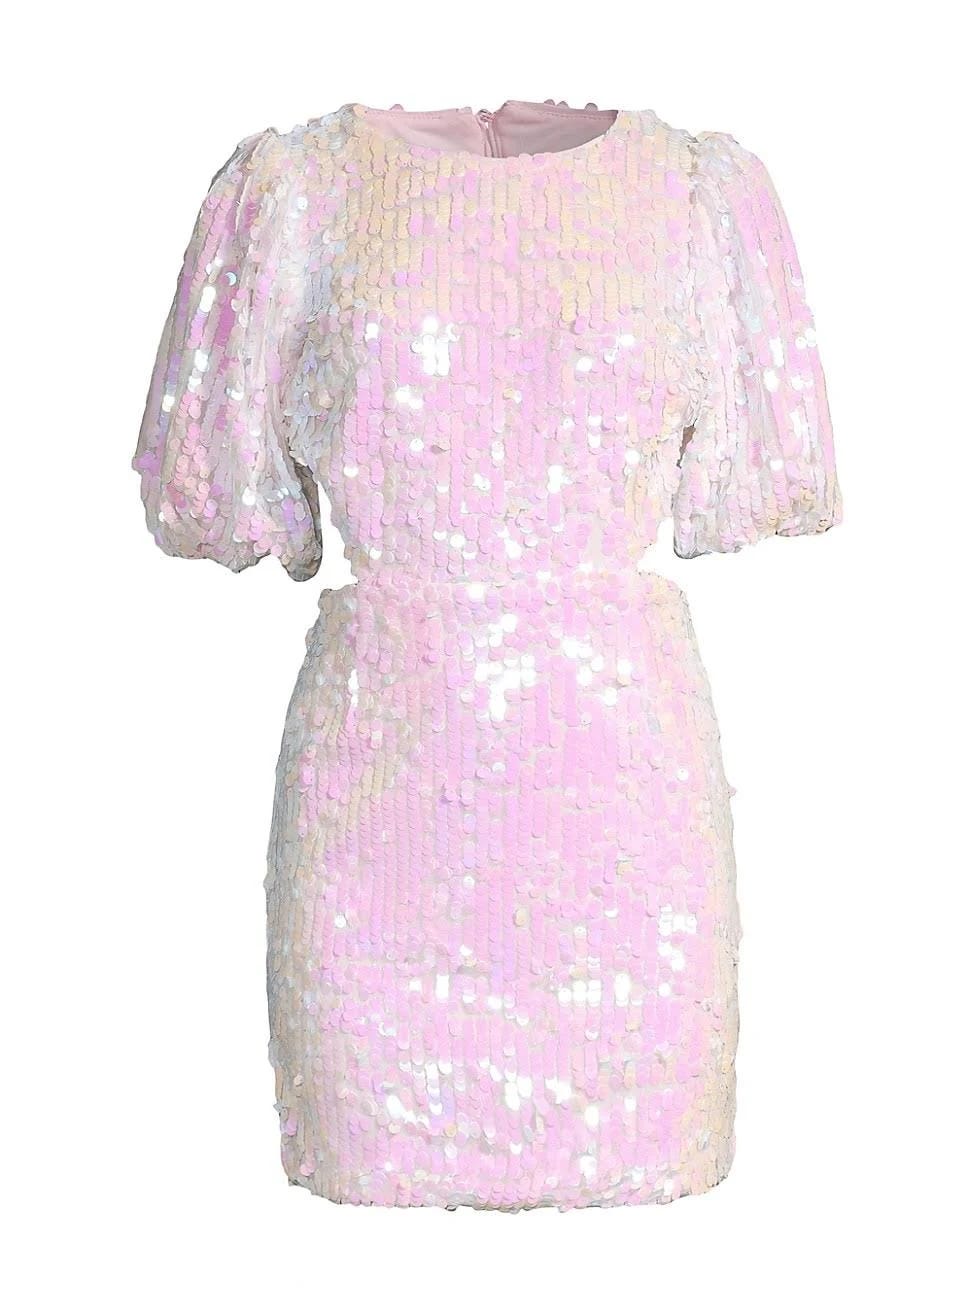 Stylish Sequin Mini Dress in Cameo Pink | Image